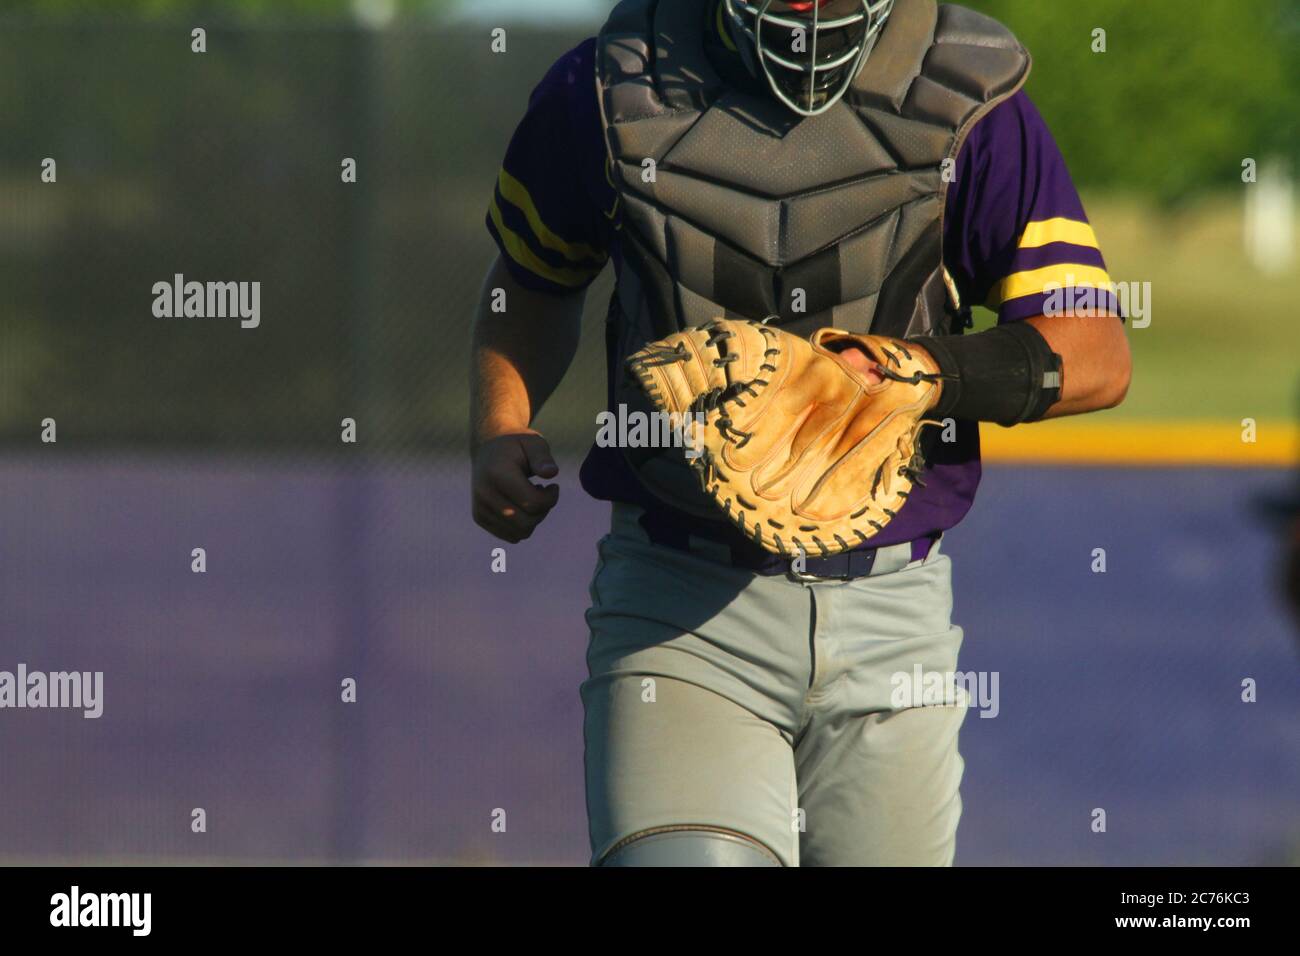 A close-up image of a baseball catcher heading back to home plate following a visit to the pitcher's mound. Stock Photo